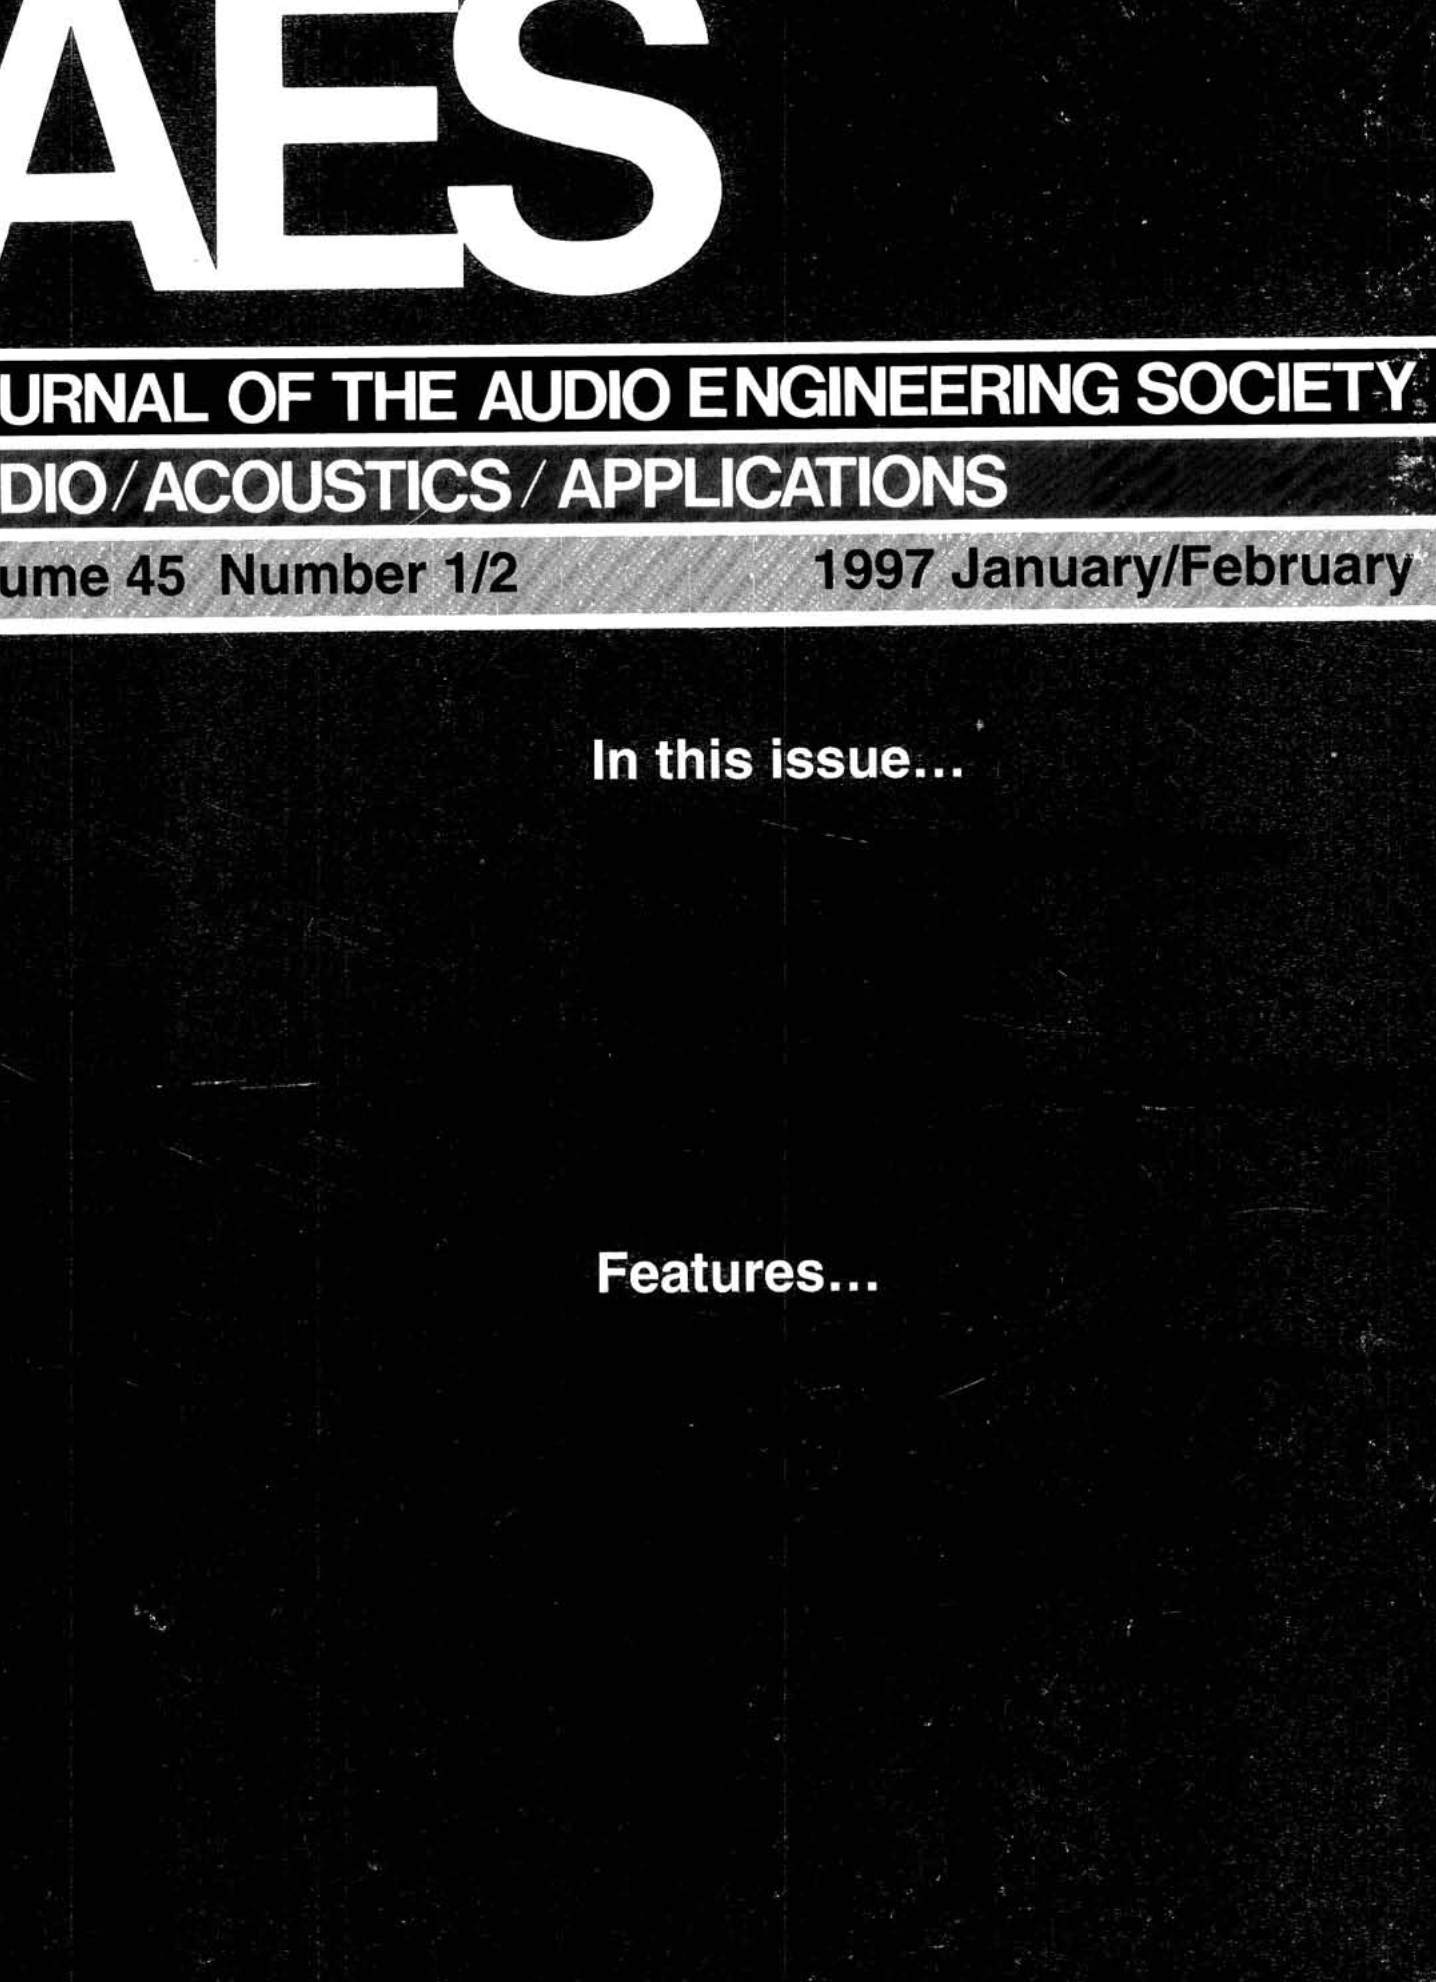 AES E-Library » Complete Journal: Issue 1/2 Volume 45